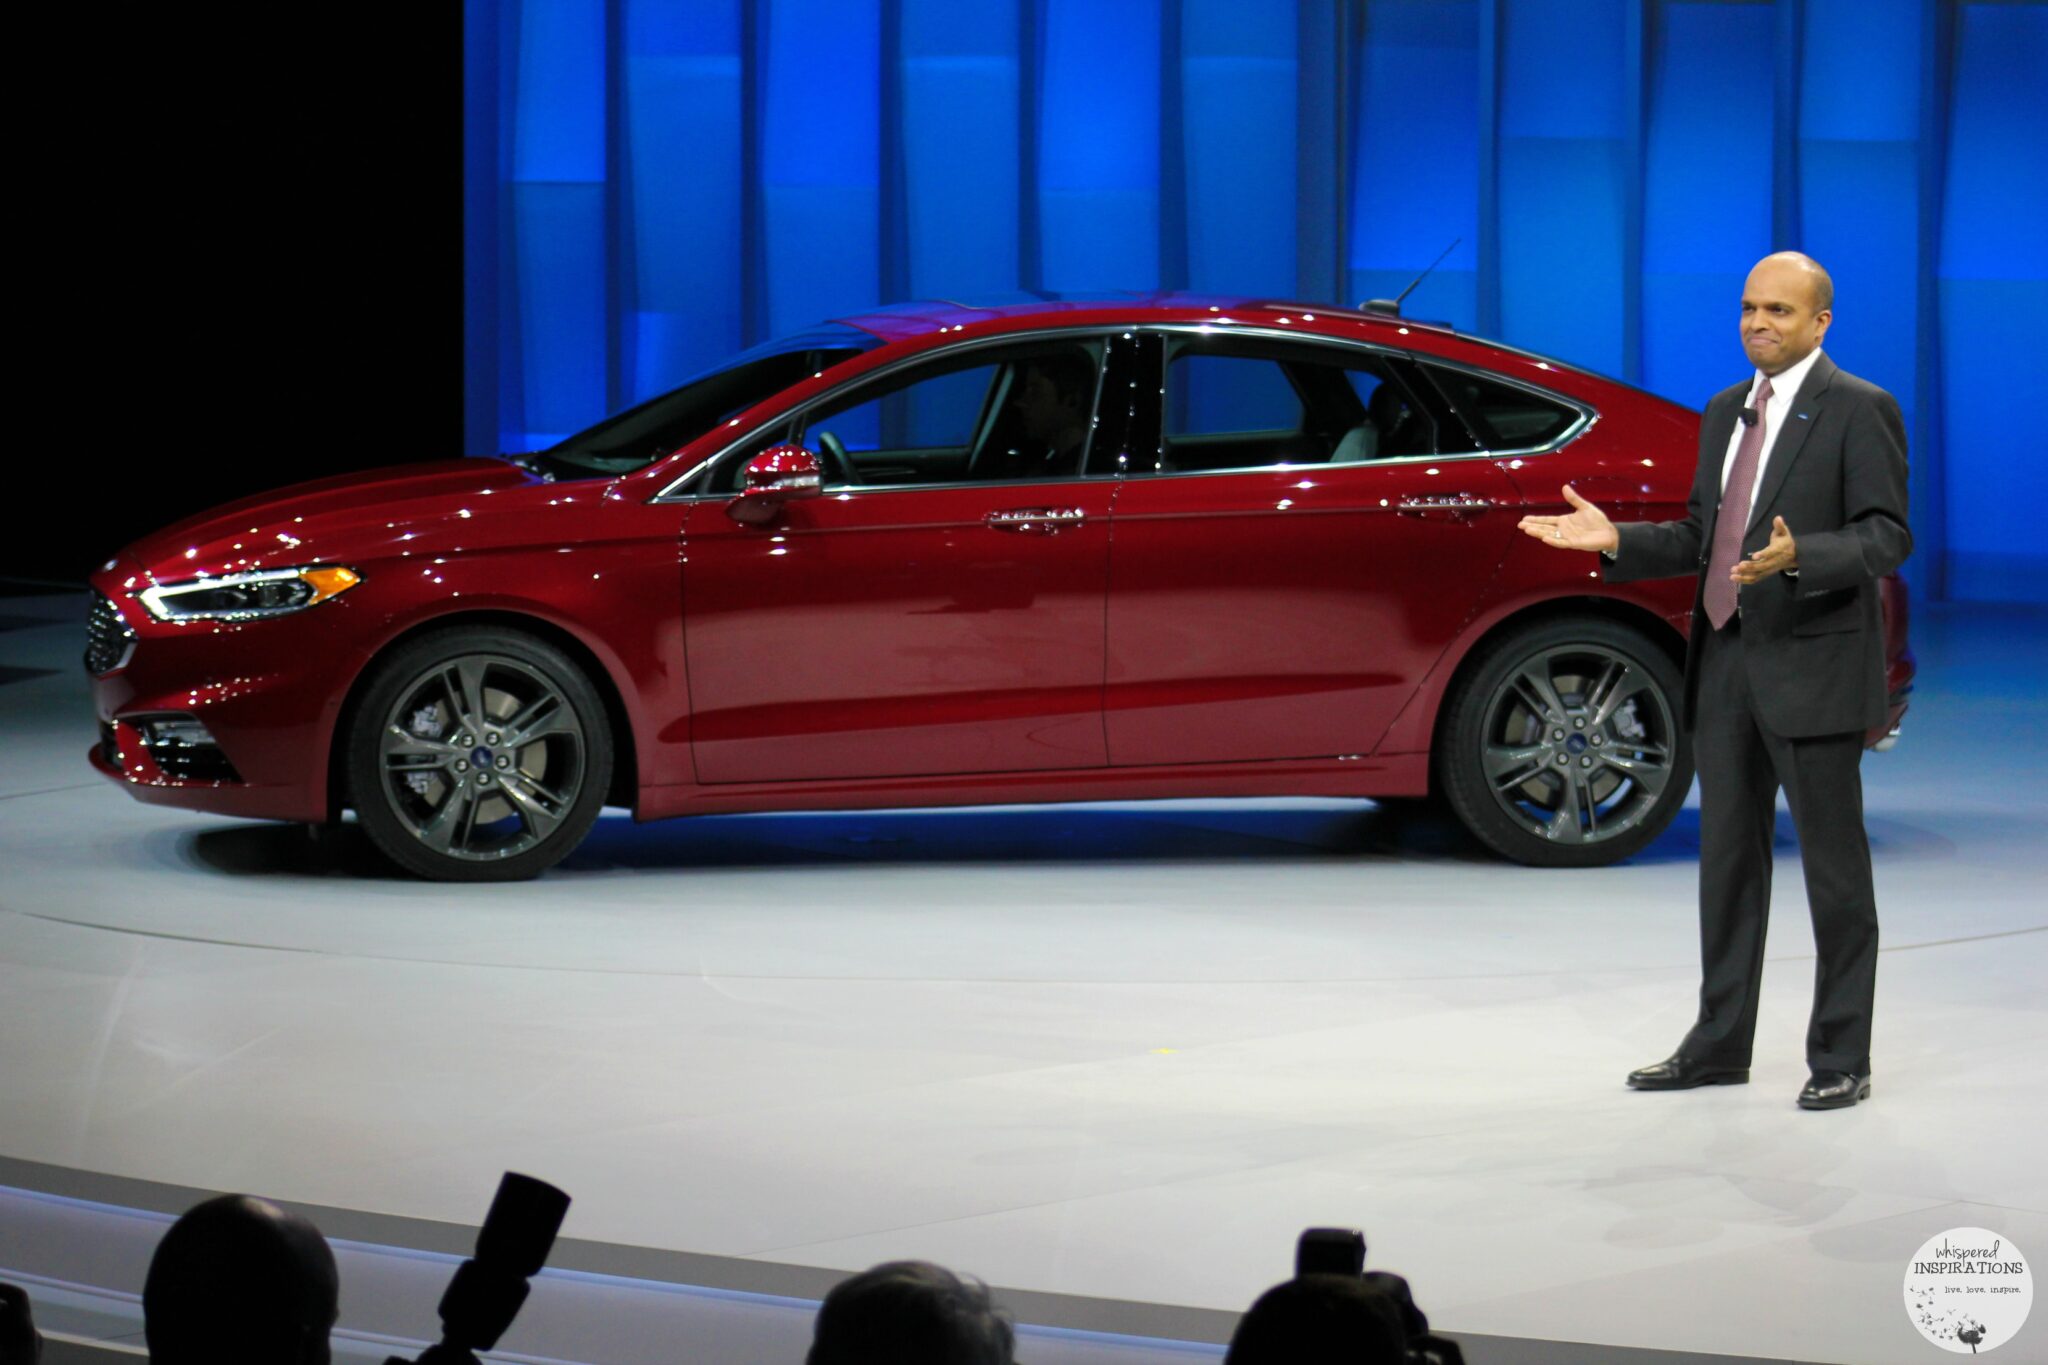 Ford Reveals the NEW 2017 Ford Fusion #FordNAIAS